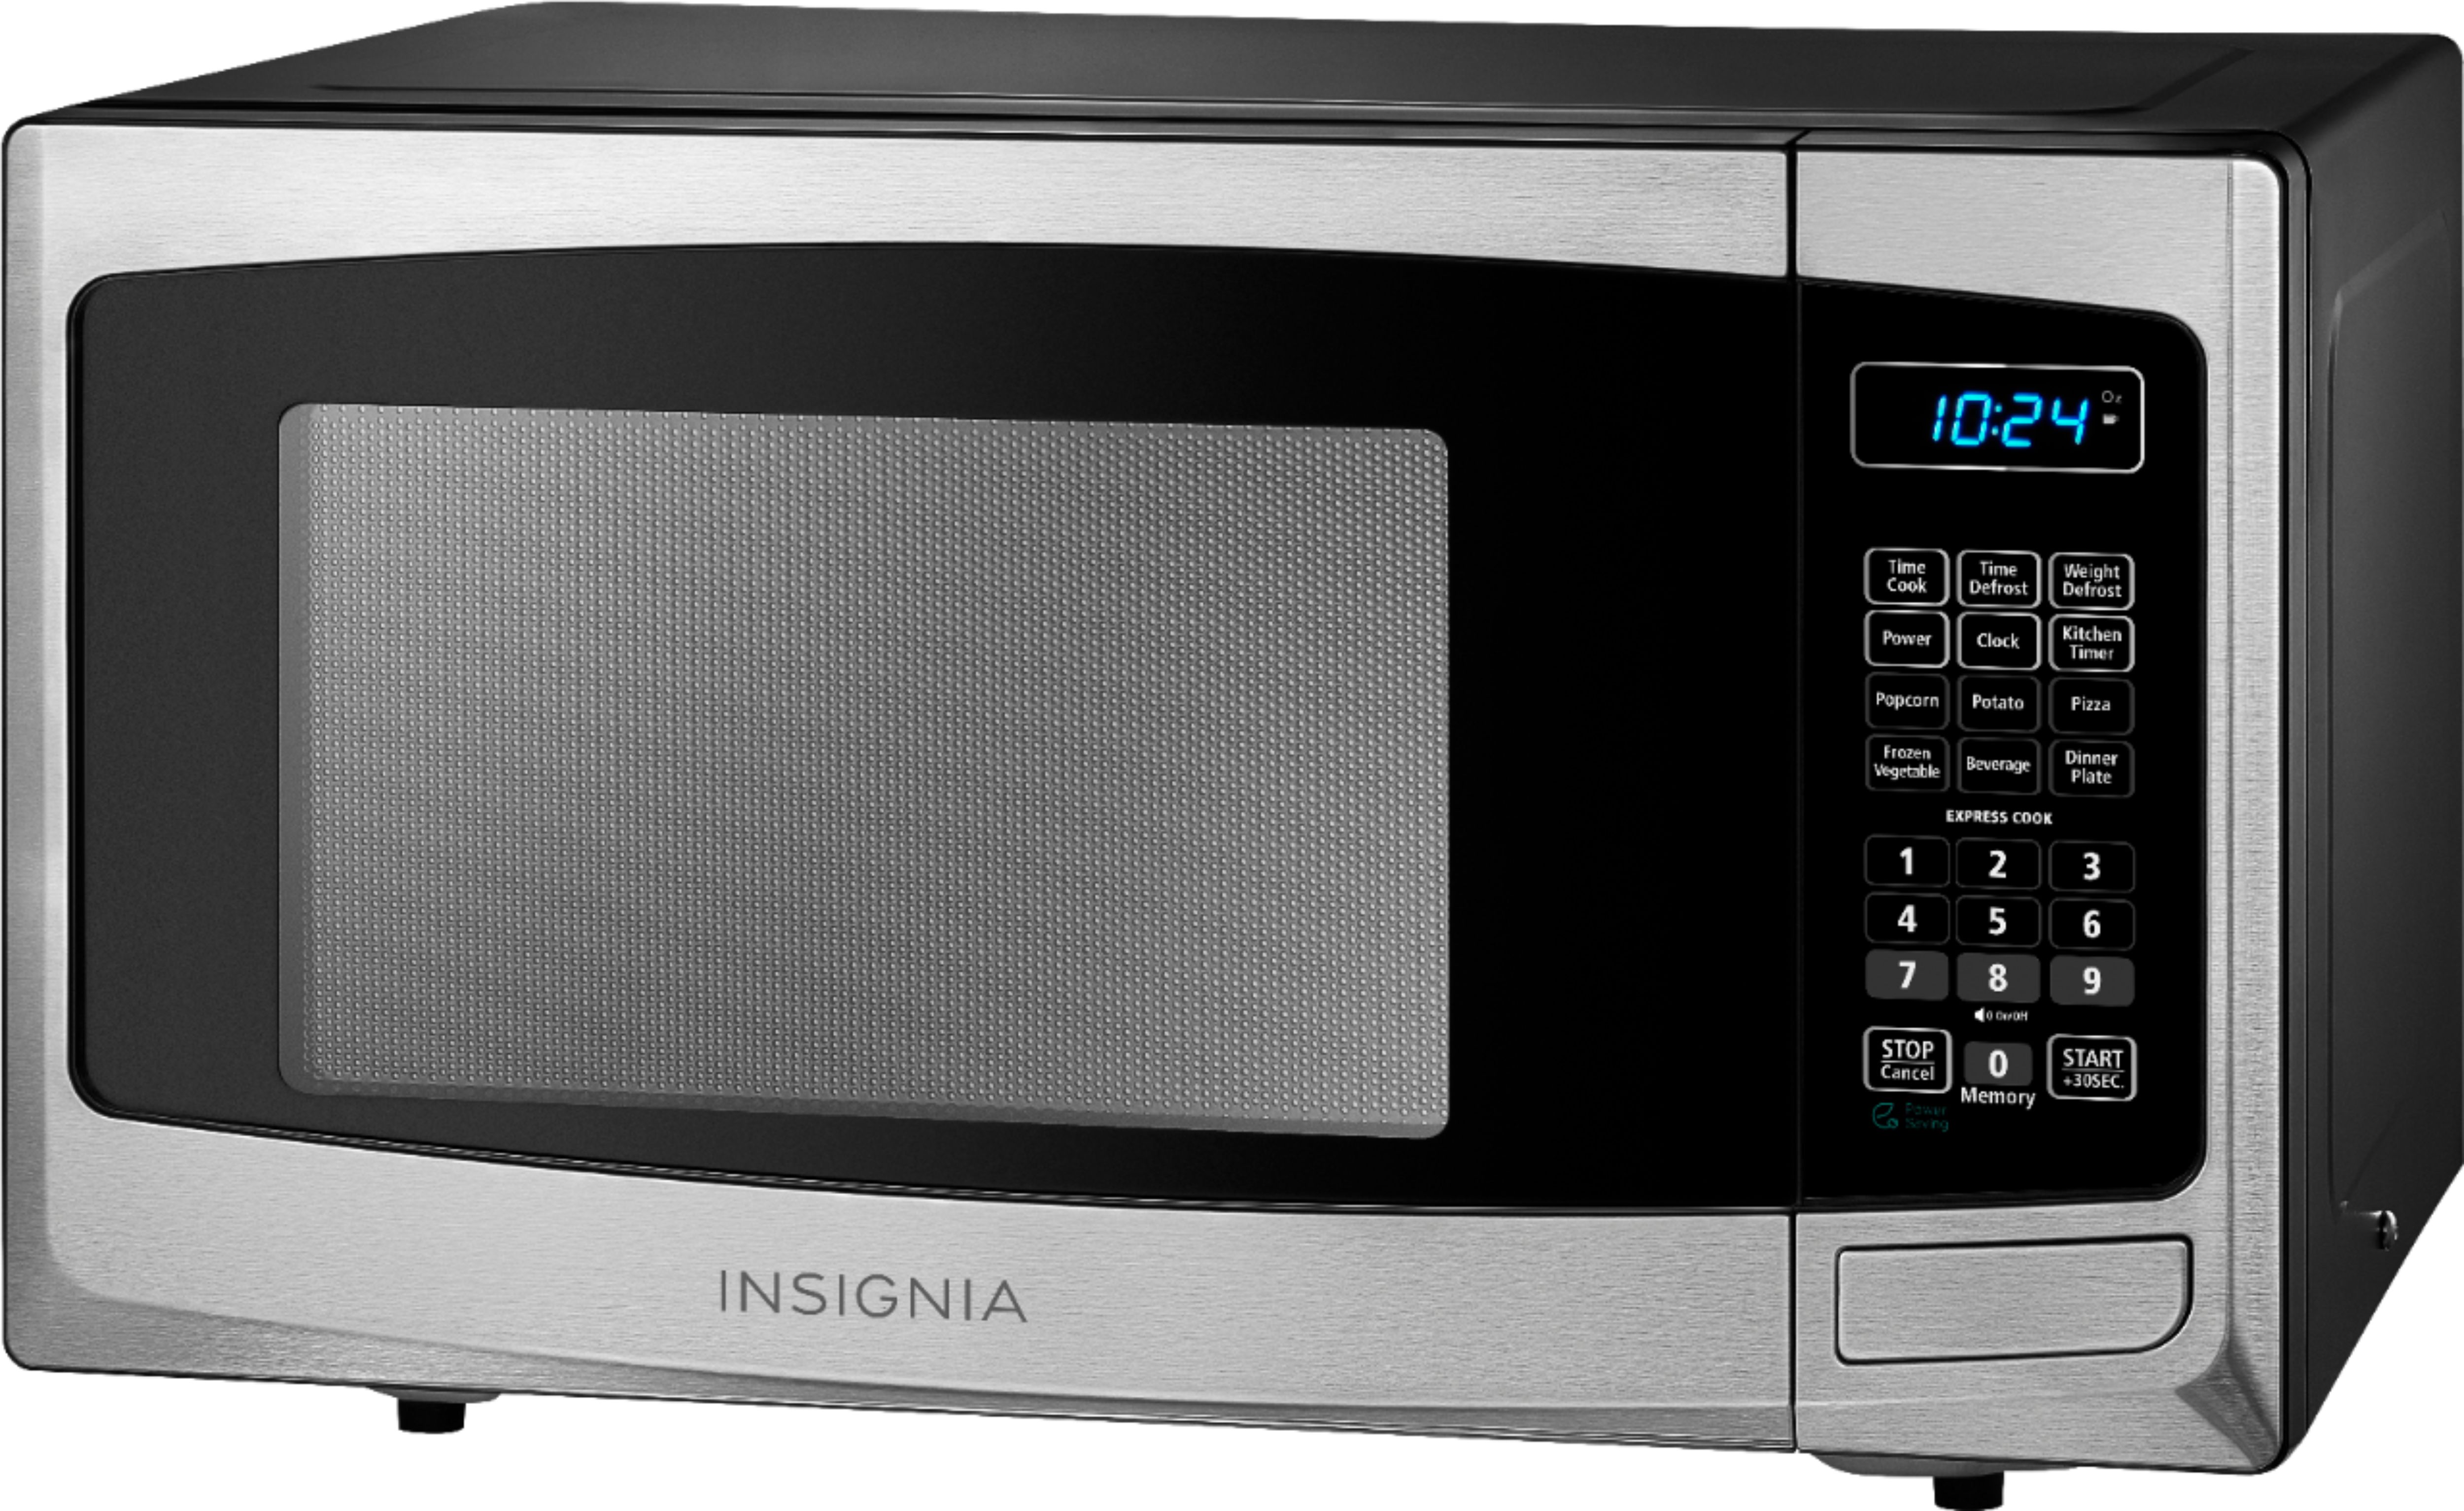 How Many Watts Is My Microwave : Buying A Microwave What To Look For In